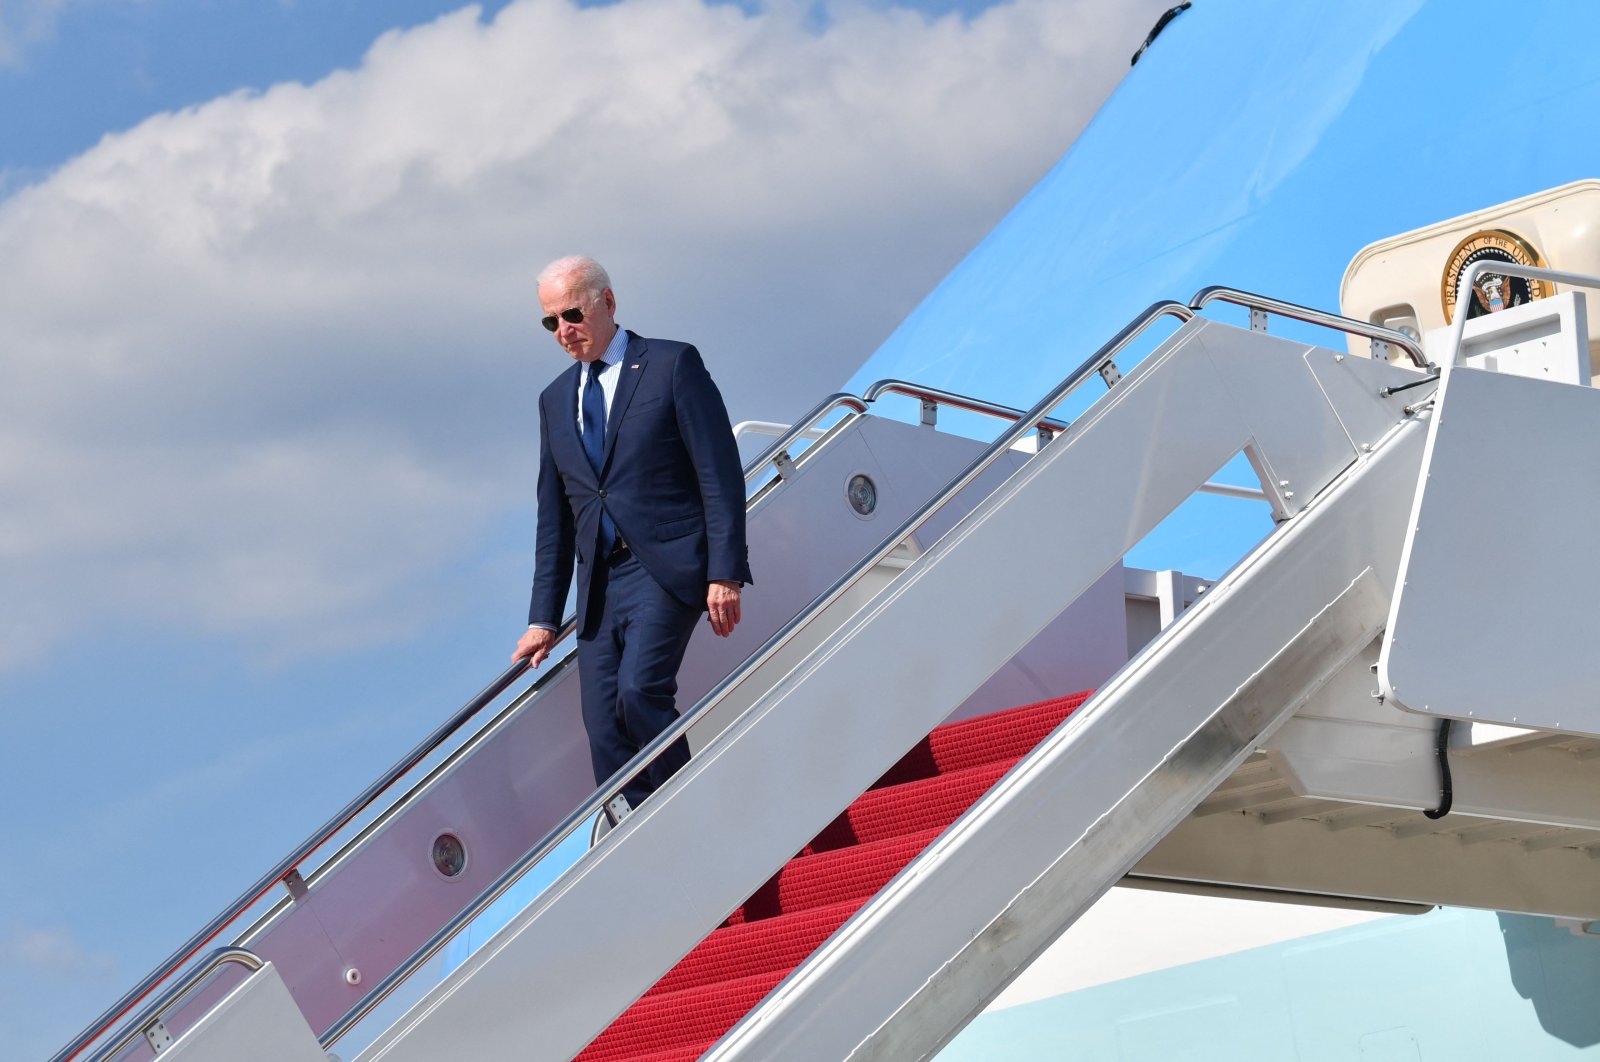 U.S. President Joe Biden steps off Air Force One upon arrival at Andrews Air Force Base in Maryland, U.S., May 27, 2021. (AFP Photo)